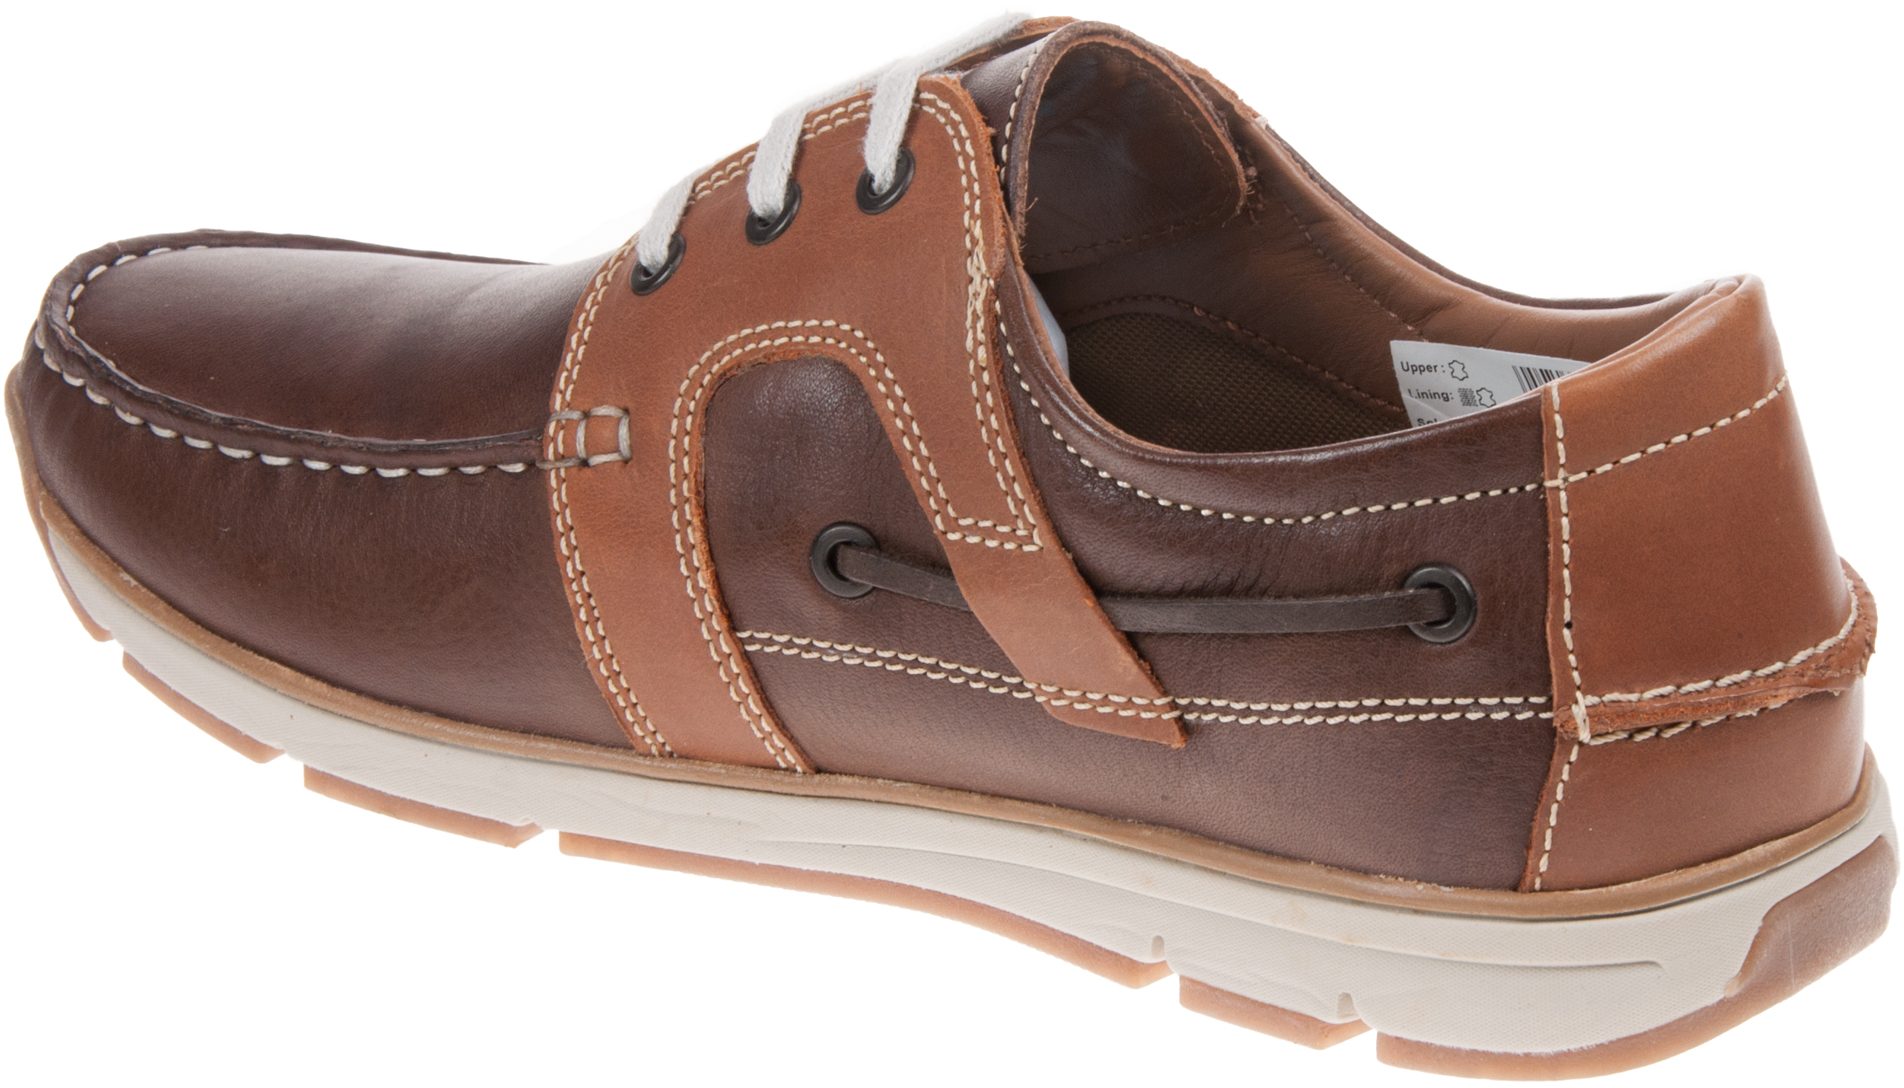 Roamers M9544 Brown M9544 B - Casual Shoes - Humphries Shoes